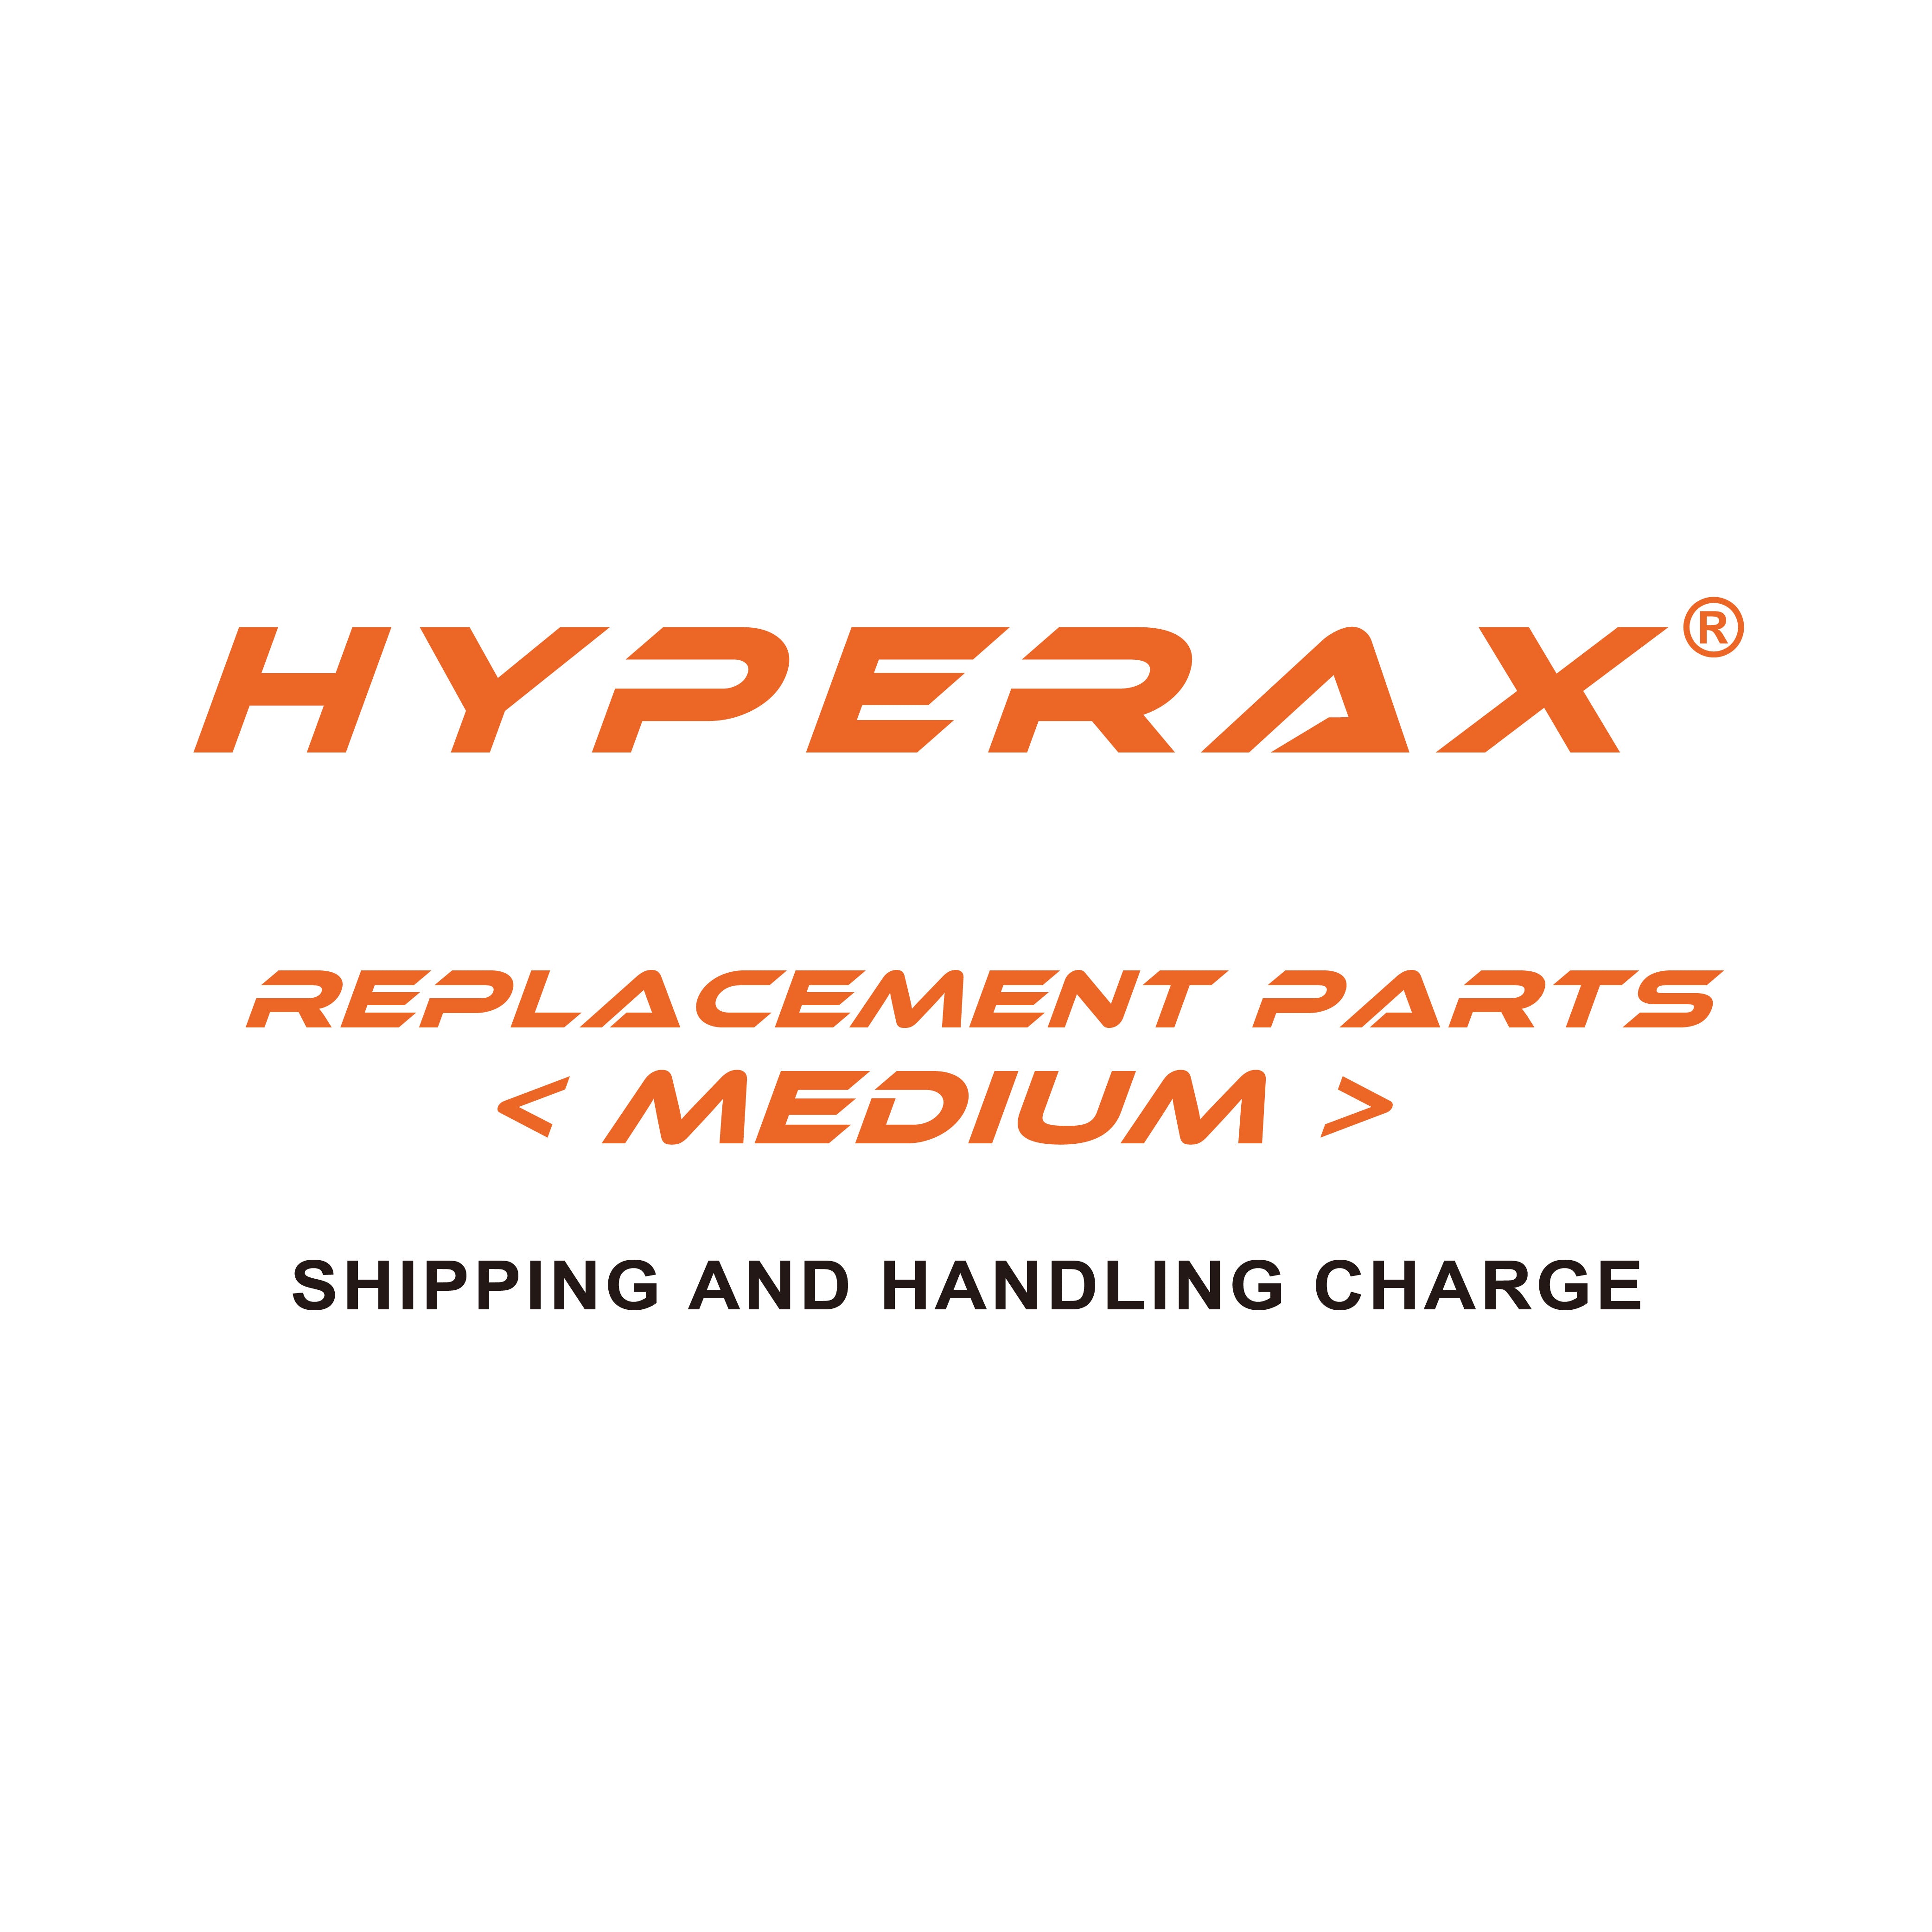 Shipping & Handling fee － Replacement parts －＜Medium＞